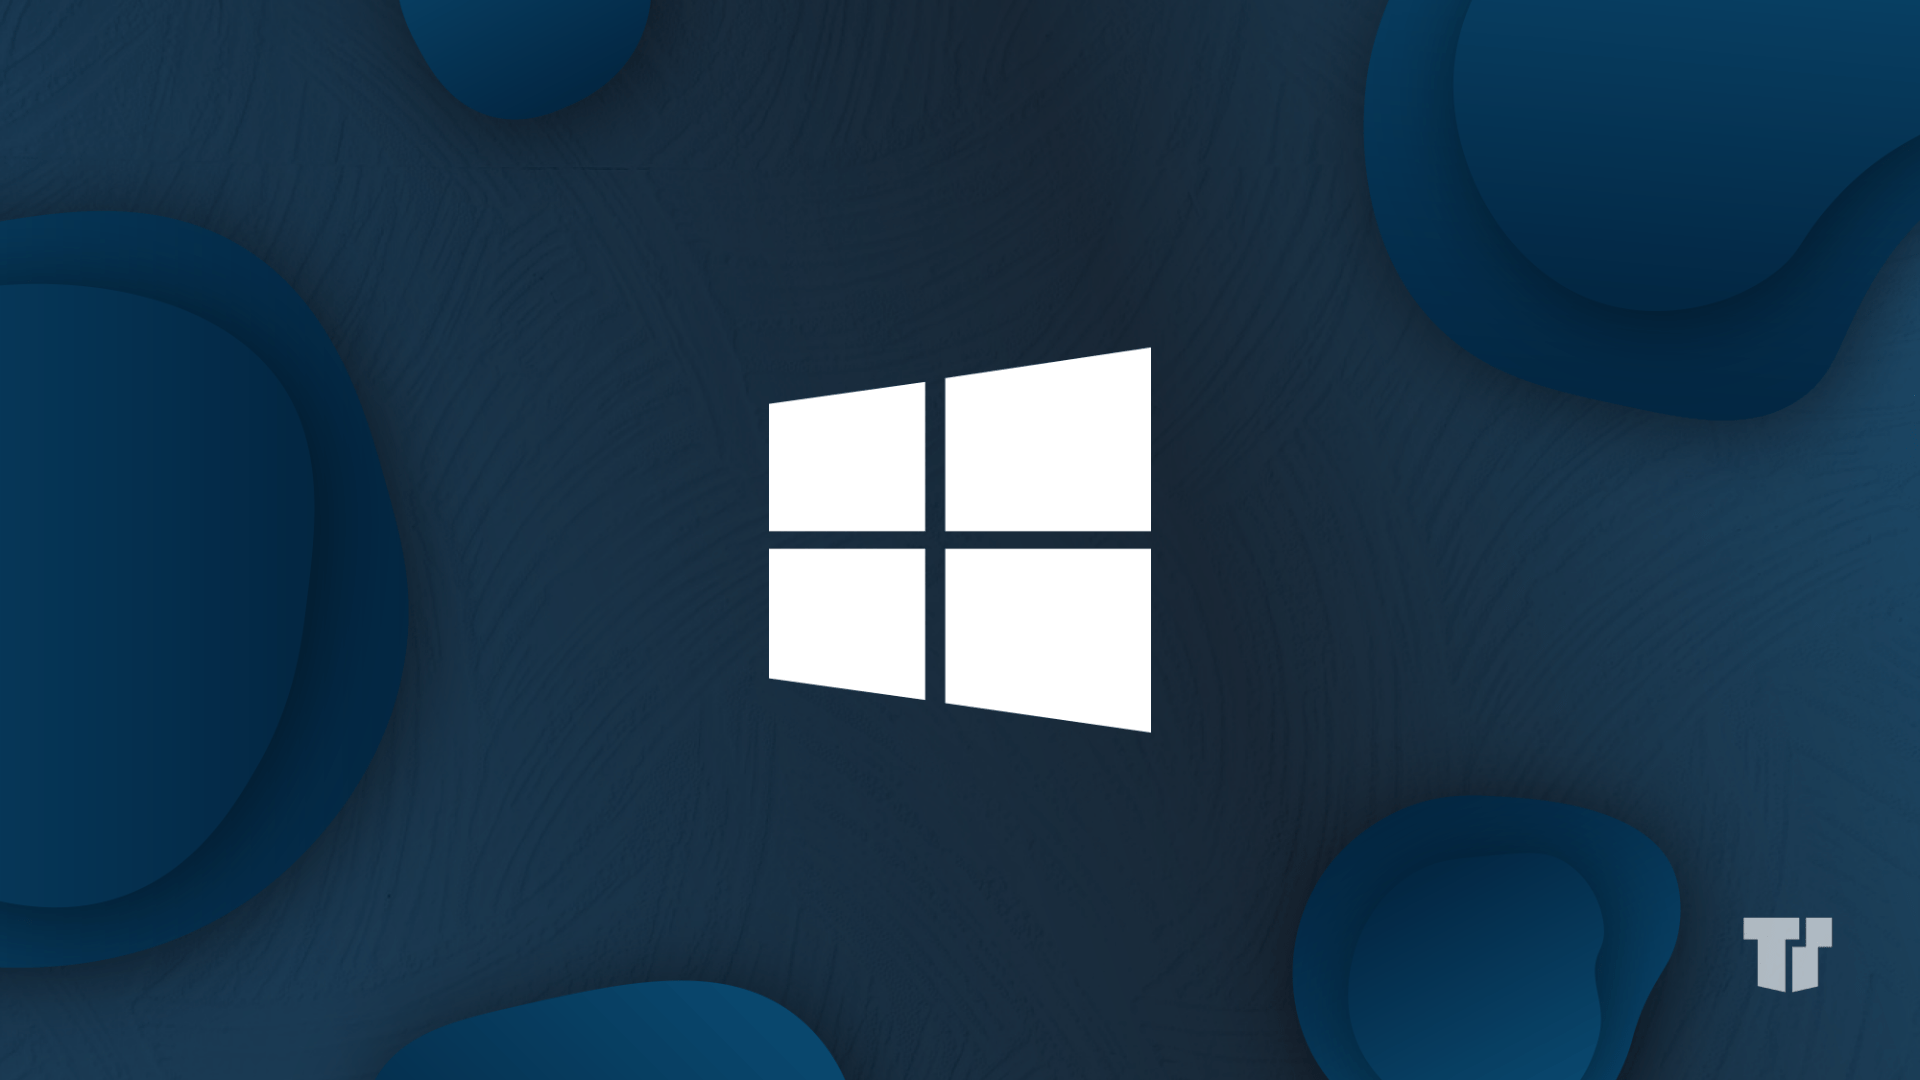 Upgrade to Windows 10: The Simple Way cover image